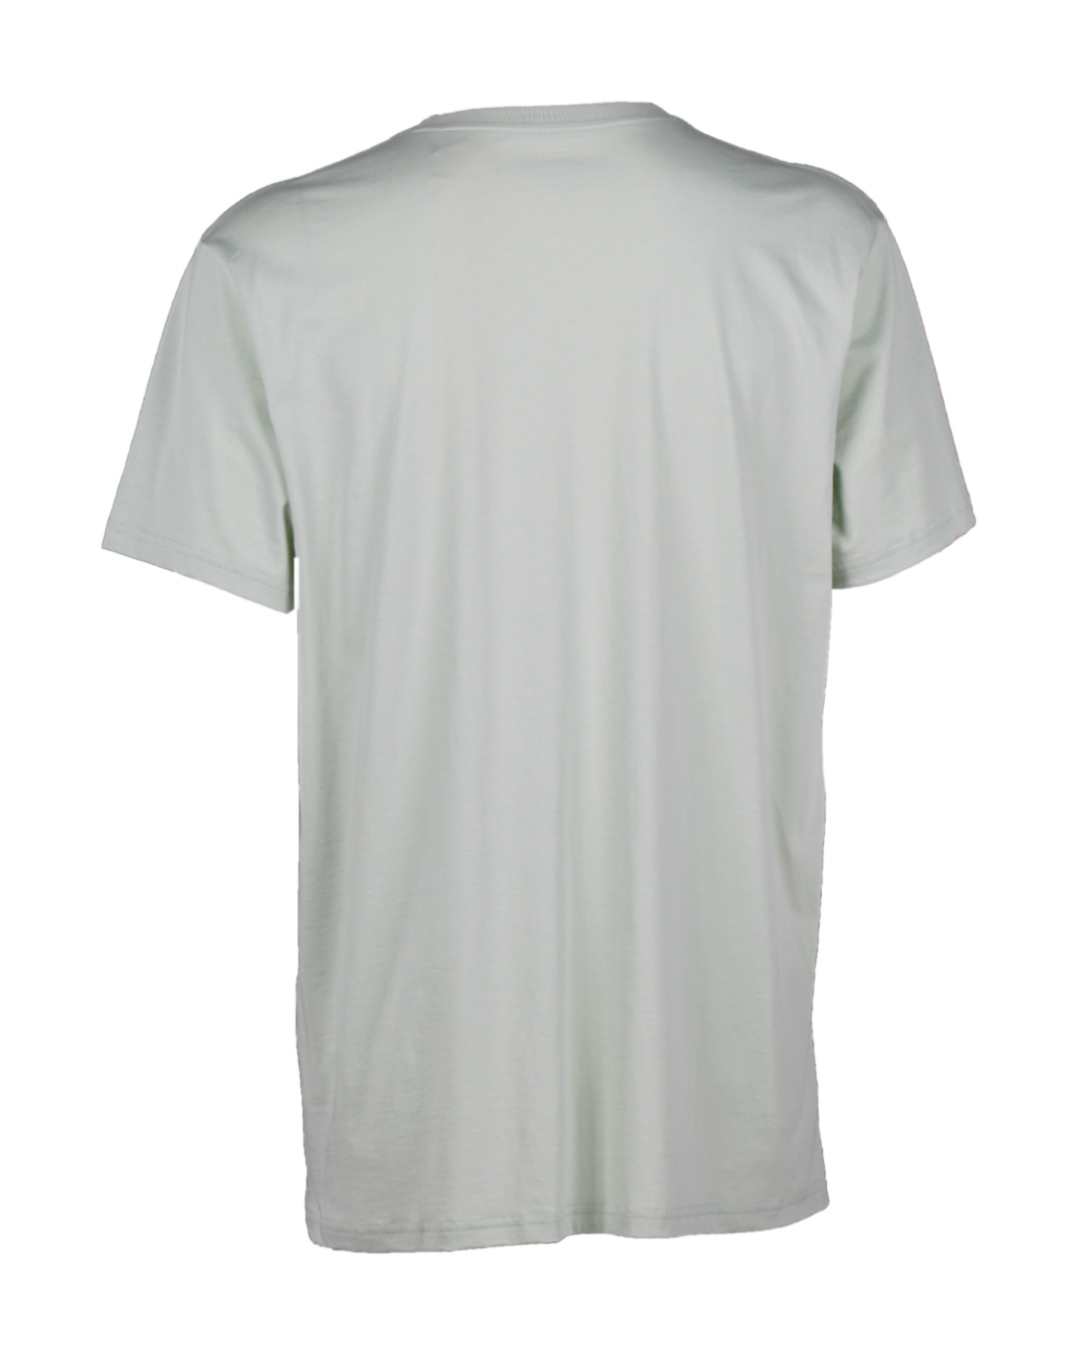 2023-Starboard-Mens-All-Star-Tee-Strand-Grass-Back